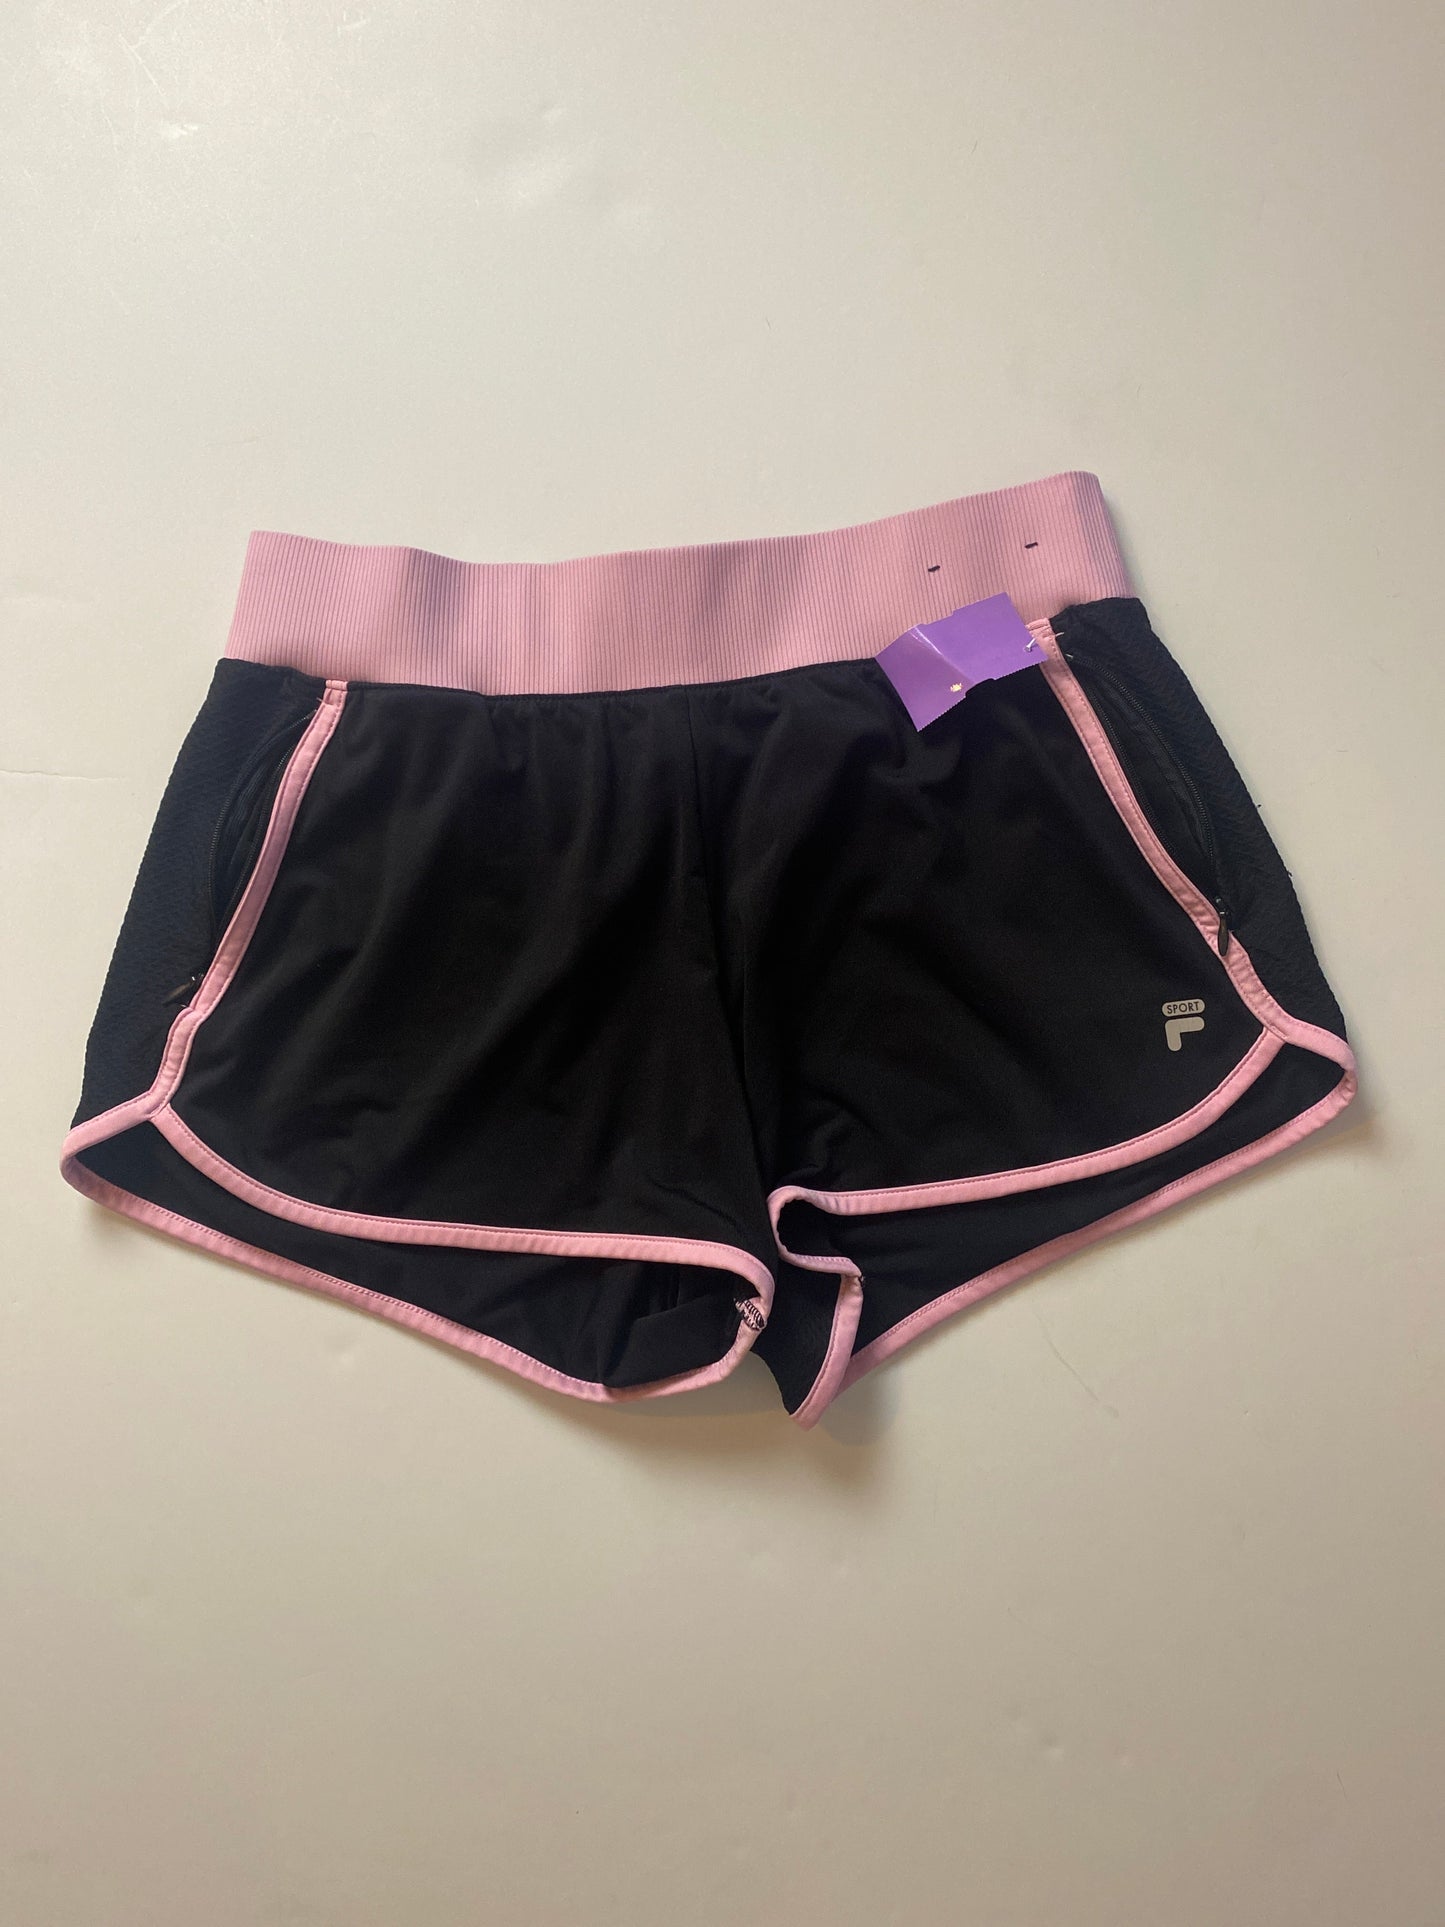 Athletic Shorts By Fila  Size: S